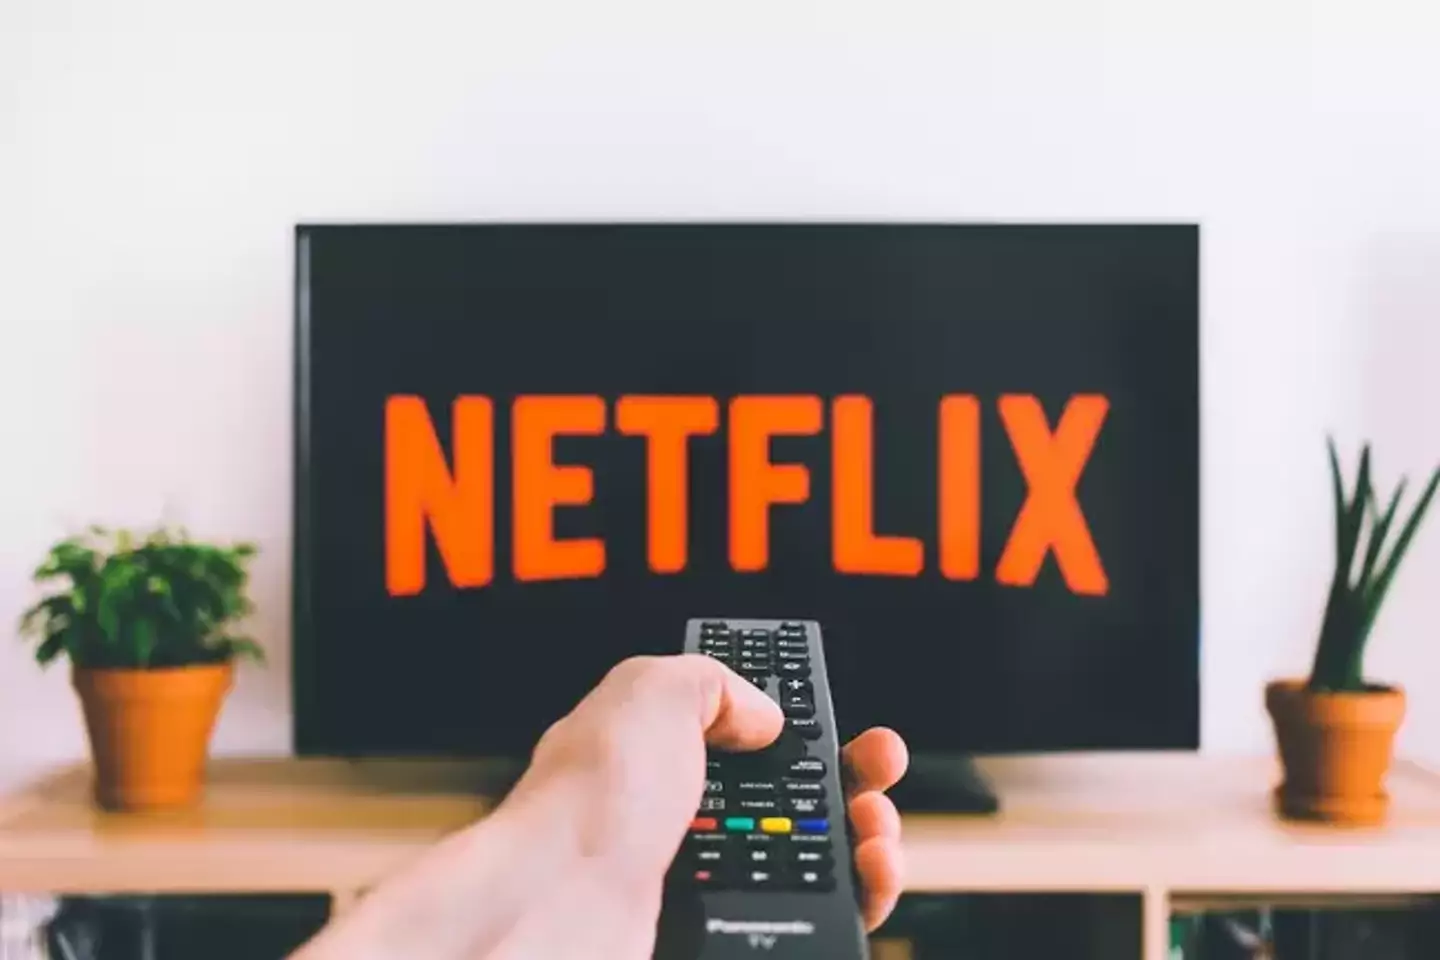 Netflix's president of advertising says millions are opting for their cheaper price-plan, which can save users up to £13 a month.